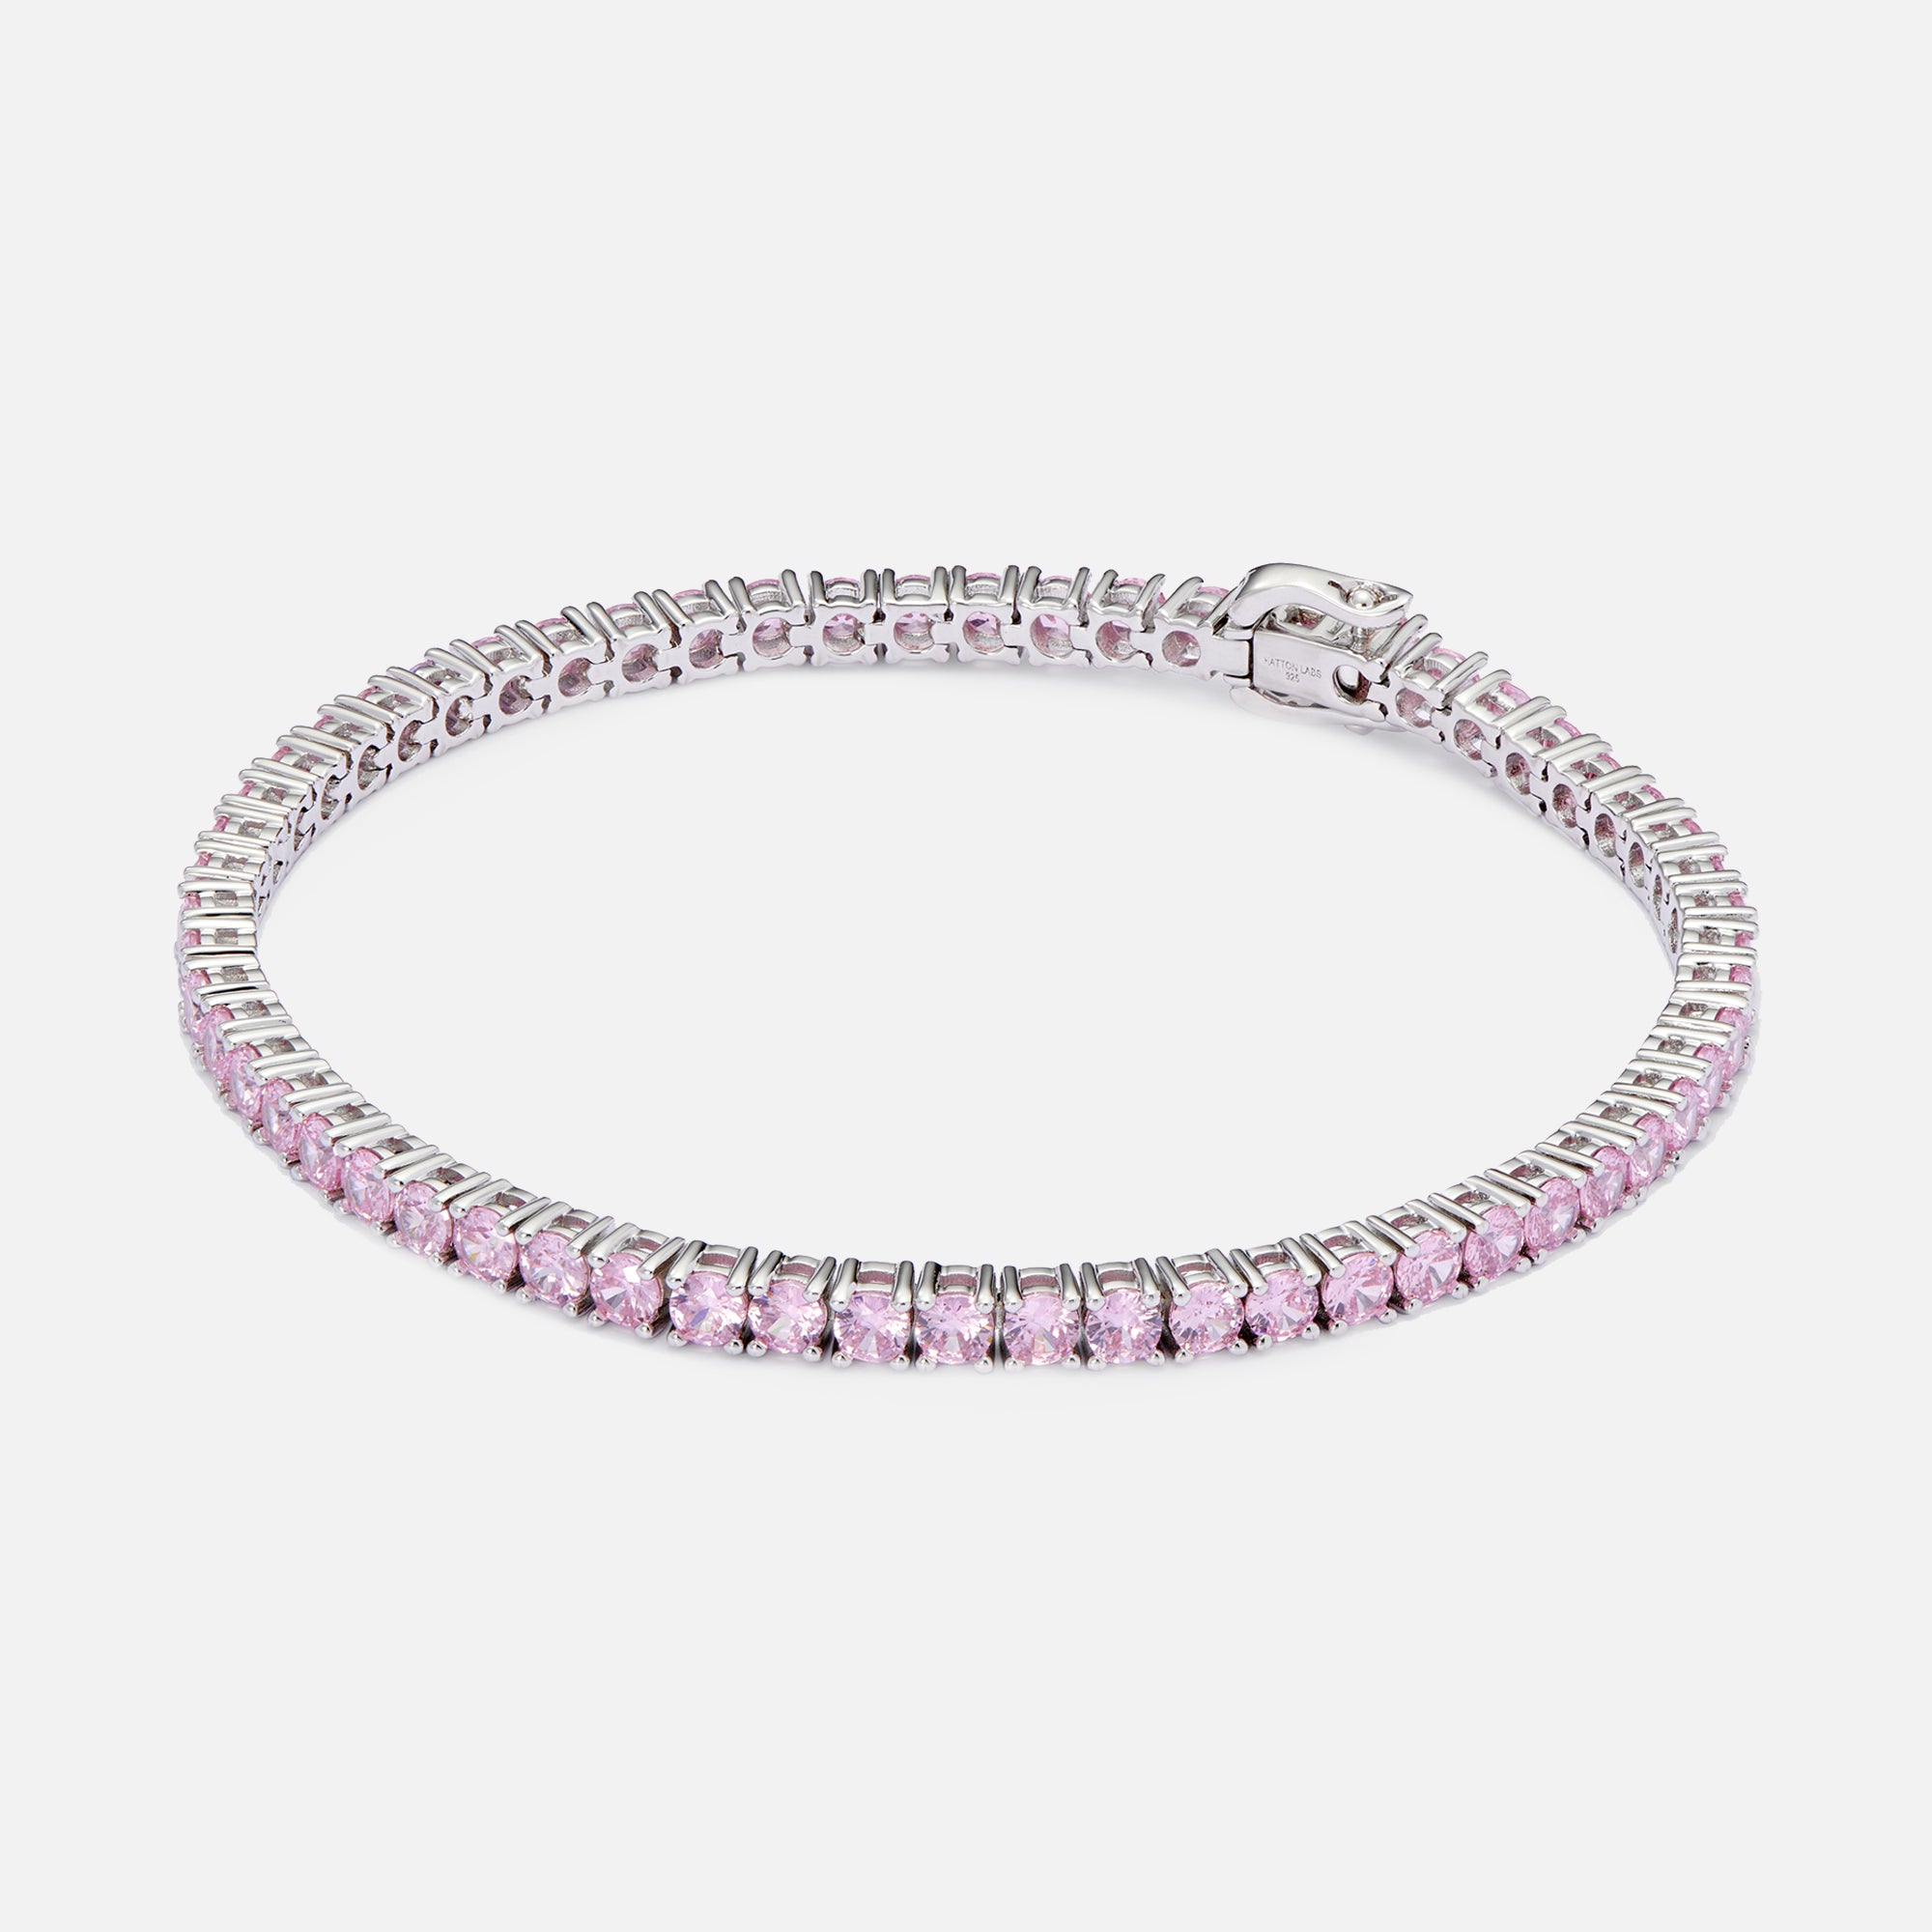 Buy quality 925 sterling silver diamond bracelet for ladies in Ahmedabad